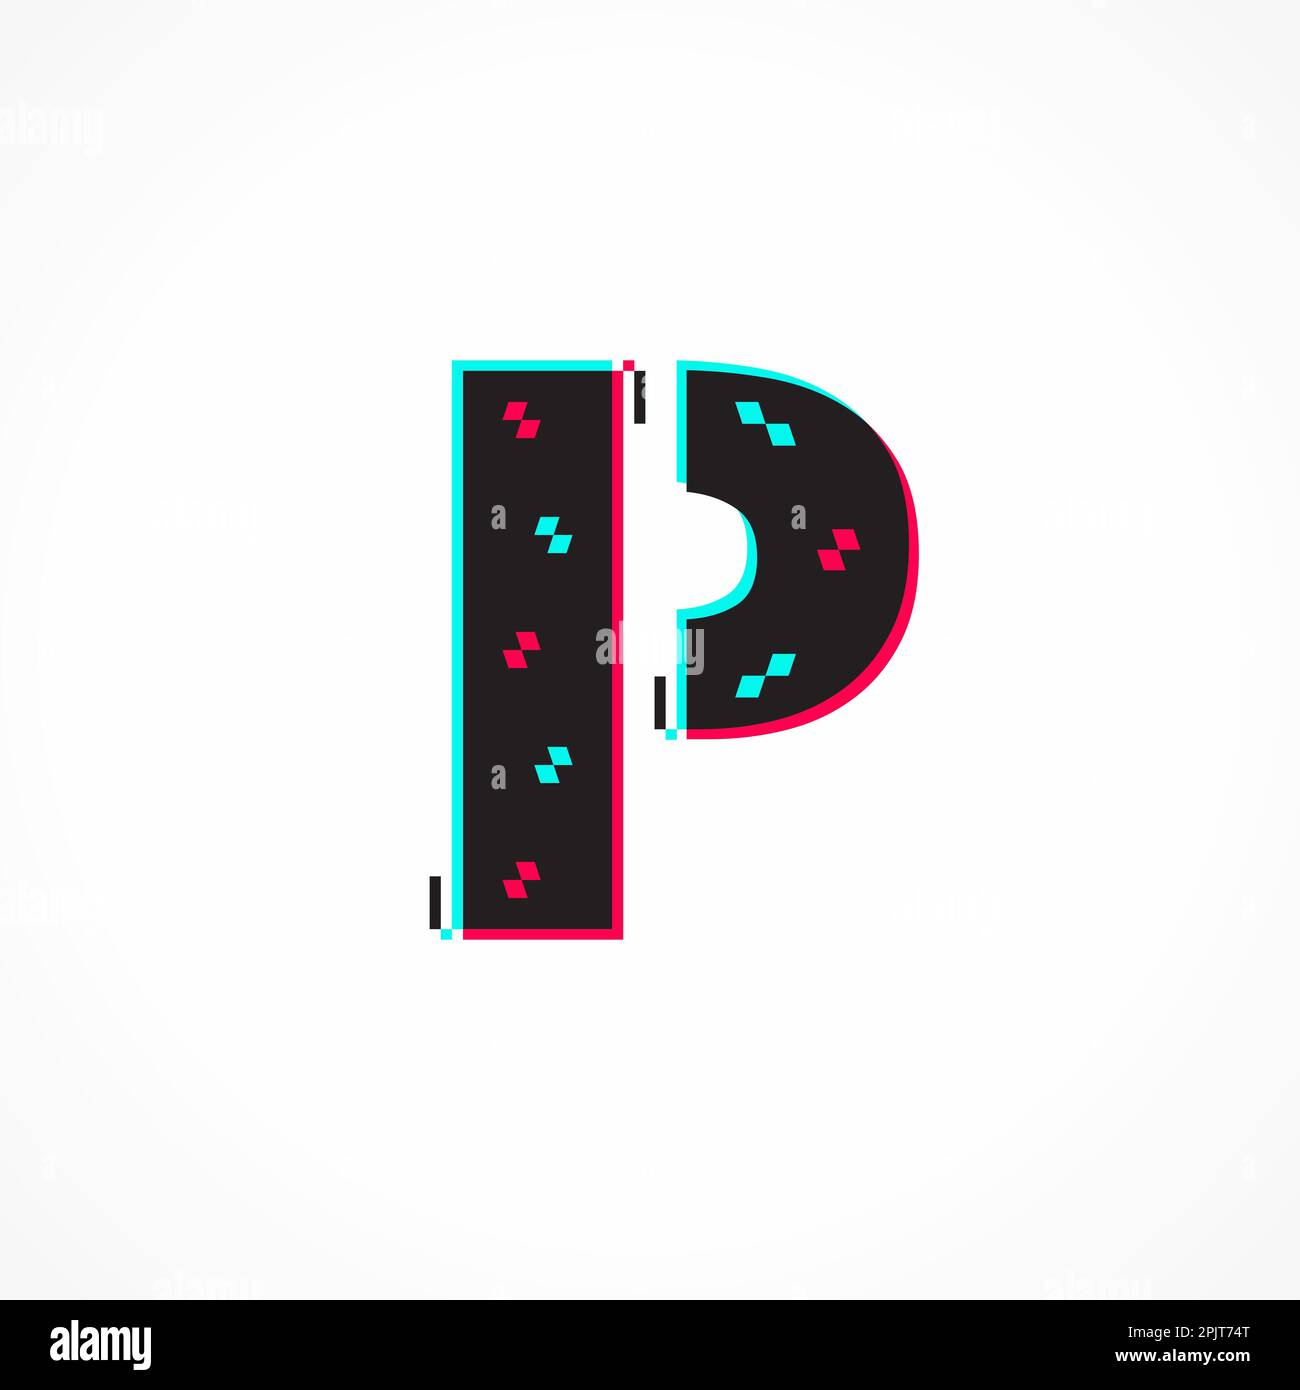 Abstract Glitch Effect Corporate Identity Letter P Logo Design Stock Vector